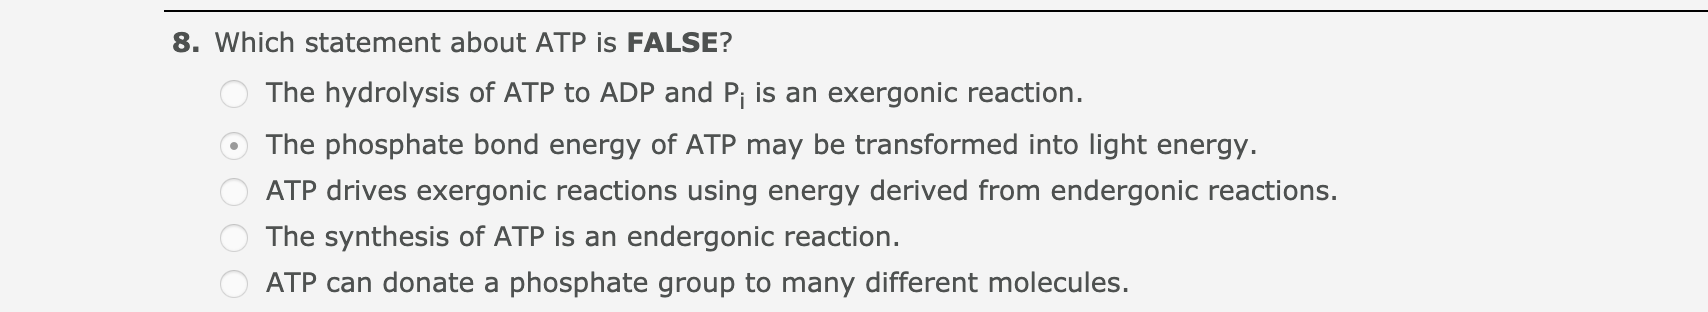 8. Which statement about ATP is FALSE?
The hydrolysis of ATP to ADP and Pj is an exergonic reaction.
The phosphate bond energy of ATP may be transformed into light energy.
ATP drives exergonic reactions using energy derived from endergonic reactions.
The synthesis of ATP is an endergonic reaction.
ATP can donate a phosphate group to many different molecules.
